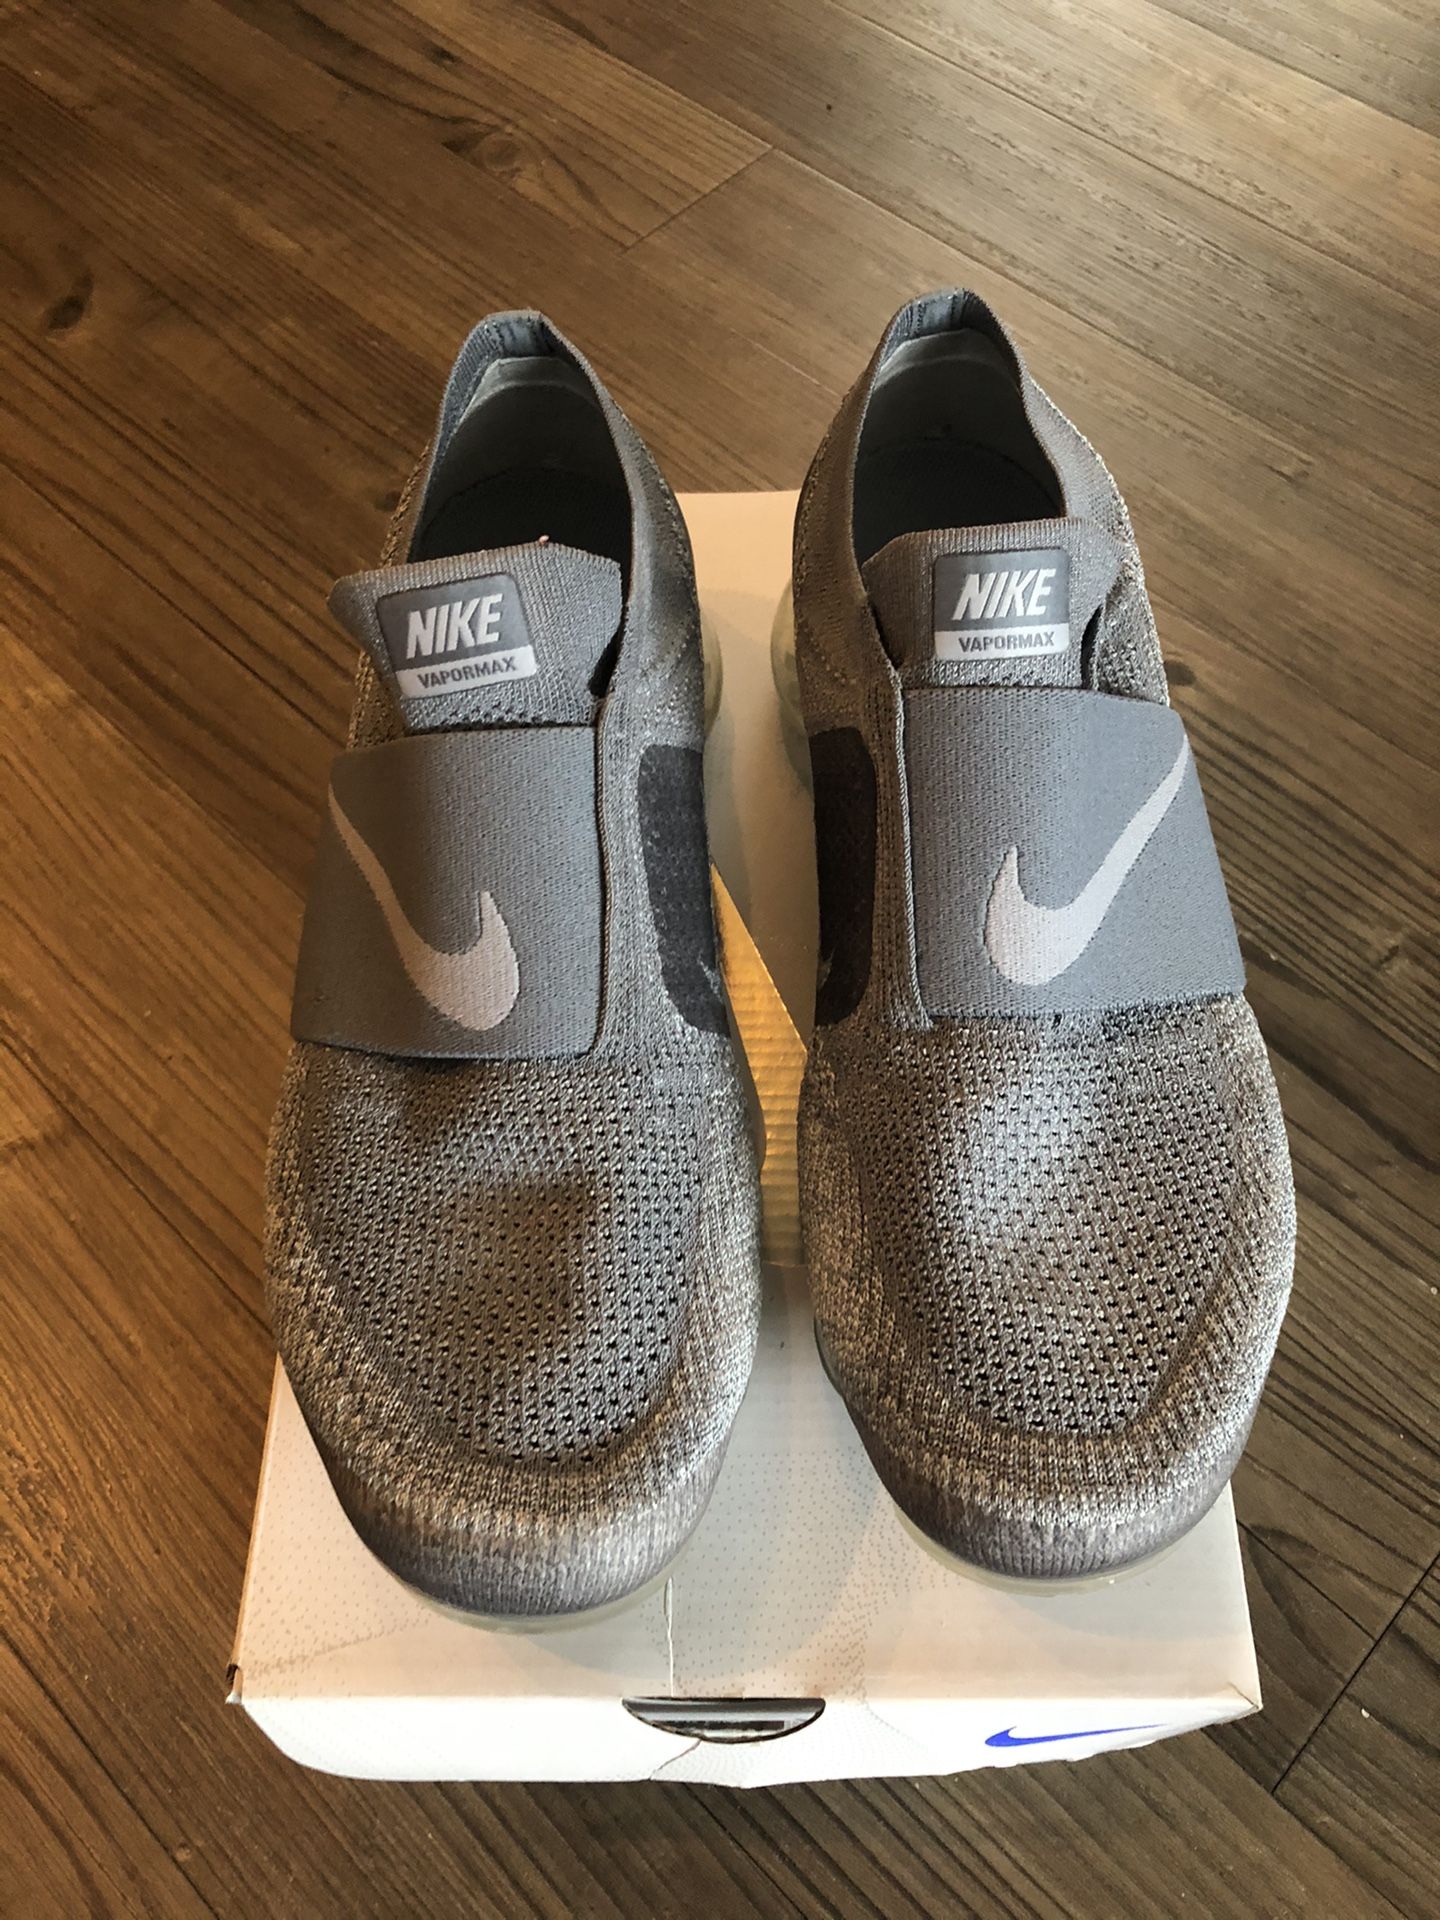 Nike Air Vapormax Moc Cool Grey (Women’s Size 11.5 and Men’s Size 10)